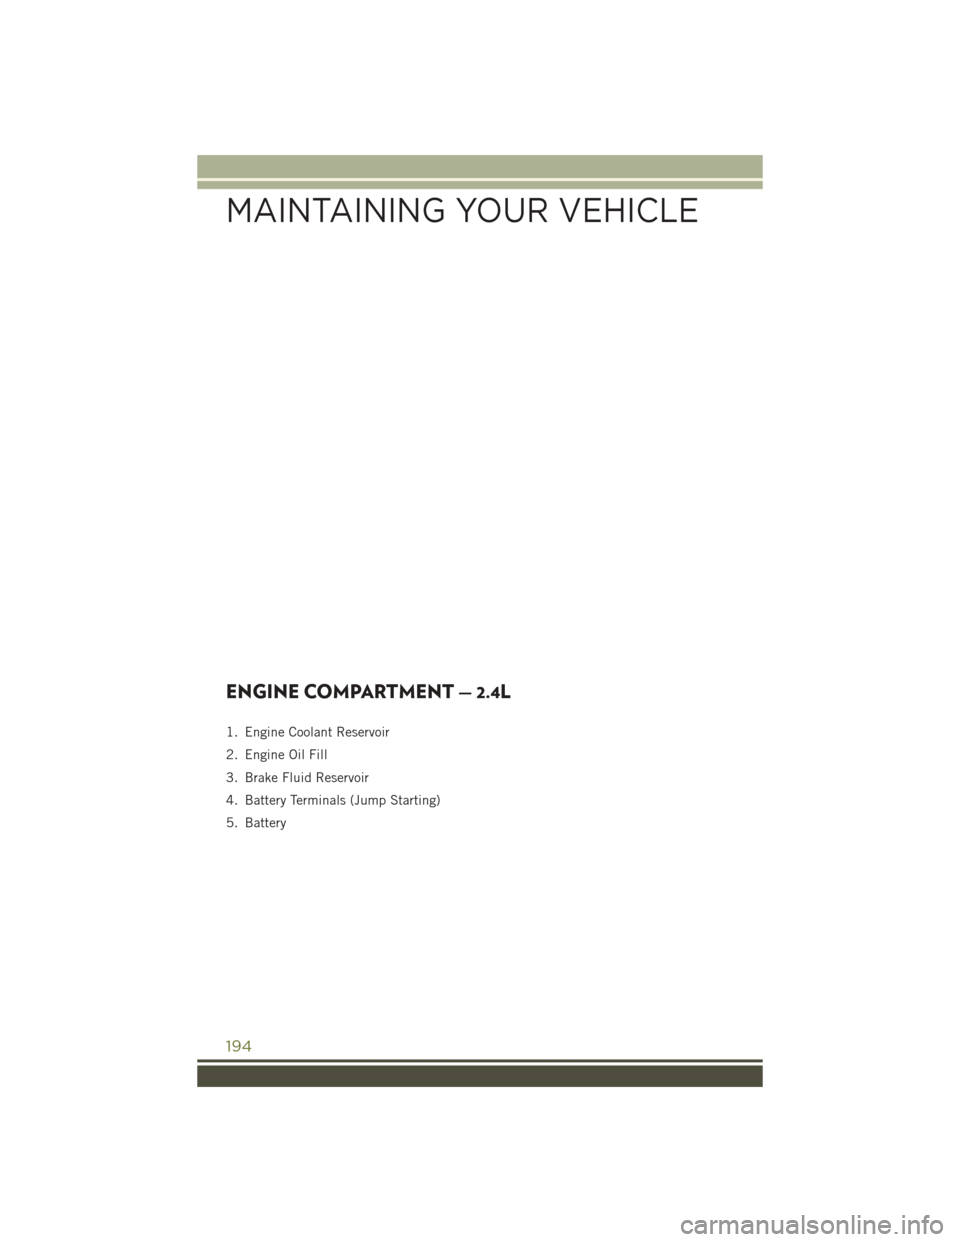 JEEP CHEROKEE 2016 KL / 5.G User Guide ENGINE COMPARTMENT — 2.4L
1. Engine Coolant Reservoir
2. Engine Oil Fill
3. Brake Fluid Reservoir
4. Battery Terminals (Jump Starting)
5. Battery
MAINTAINING YOUR VEHICLE
194 